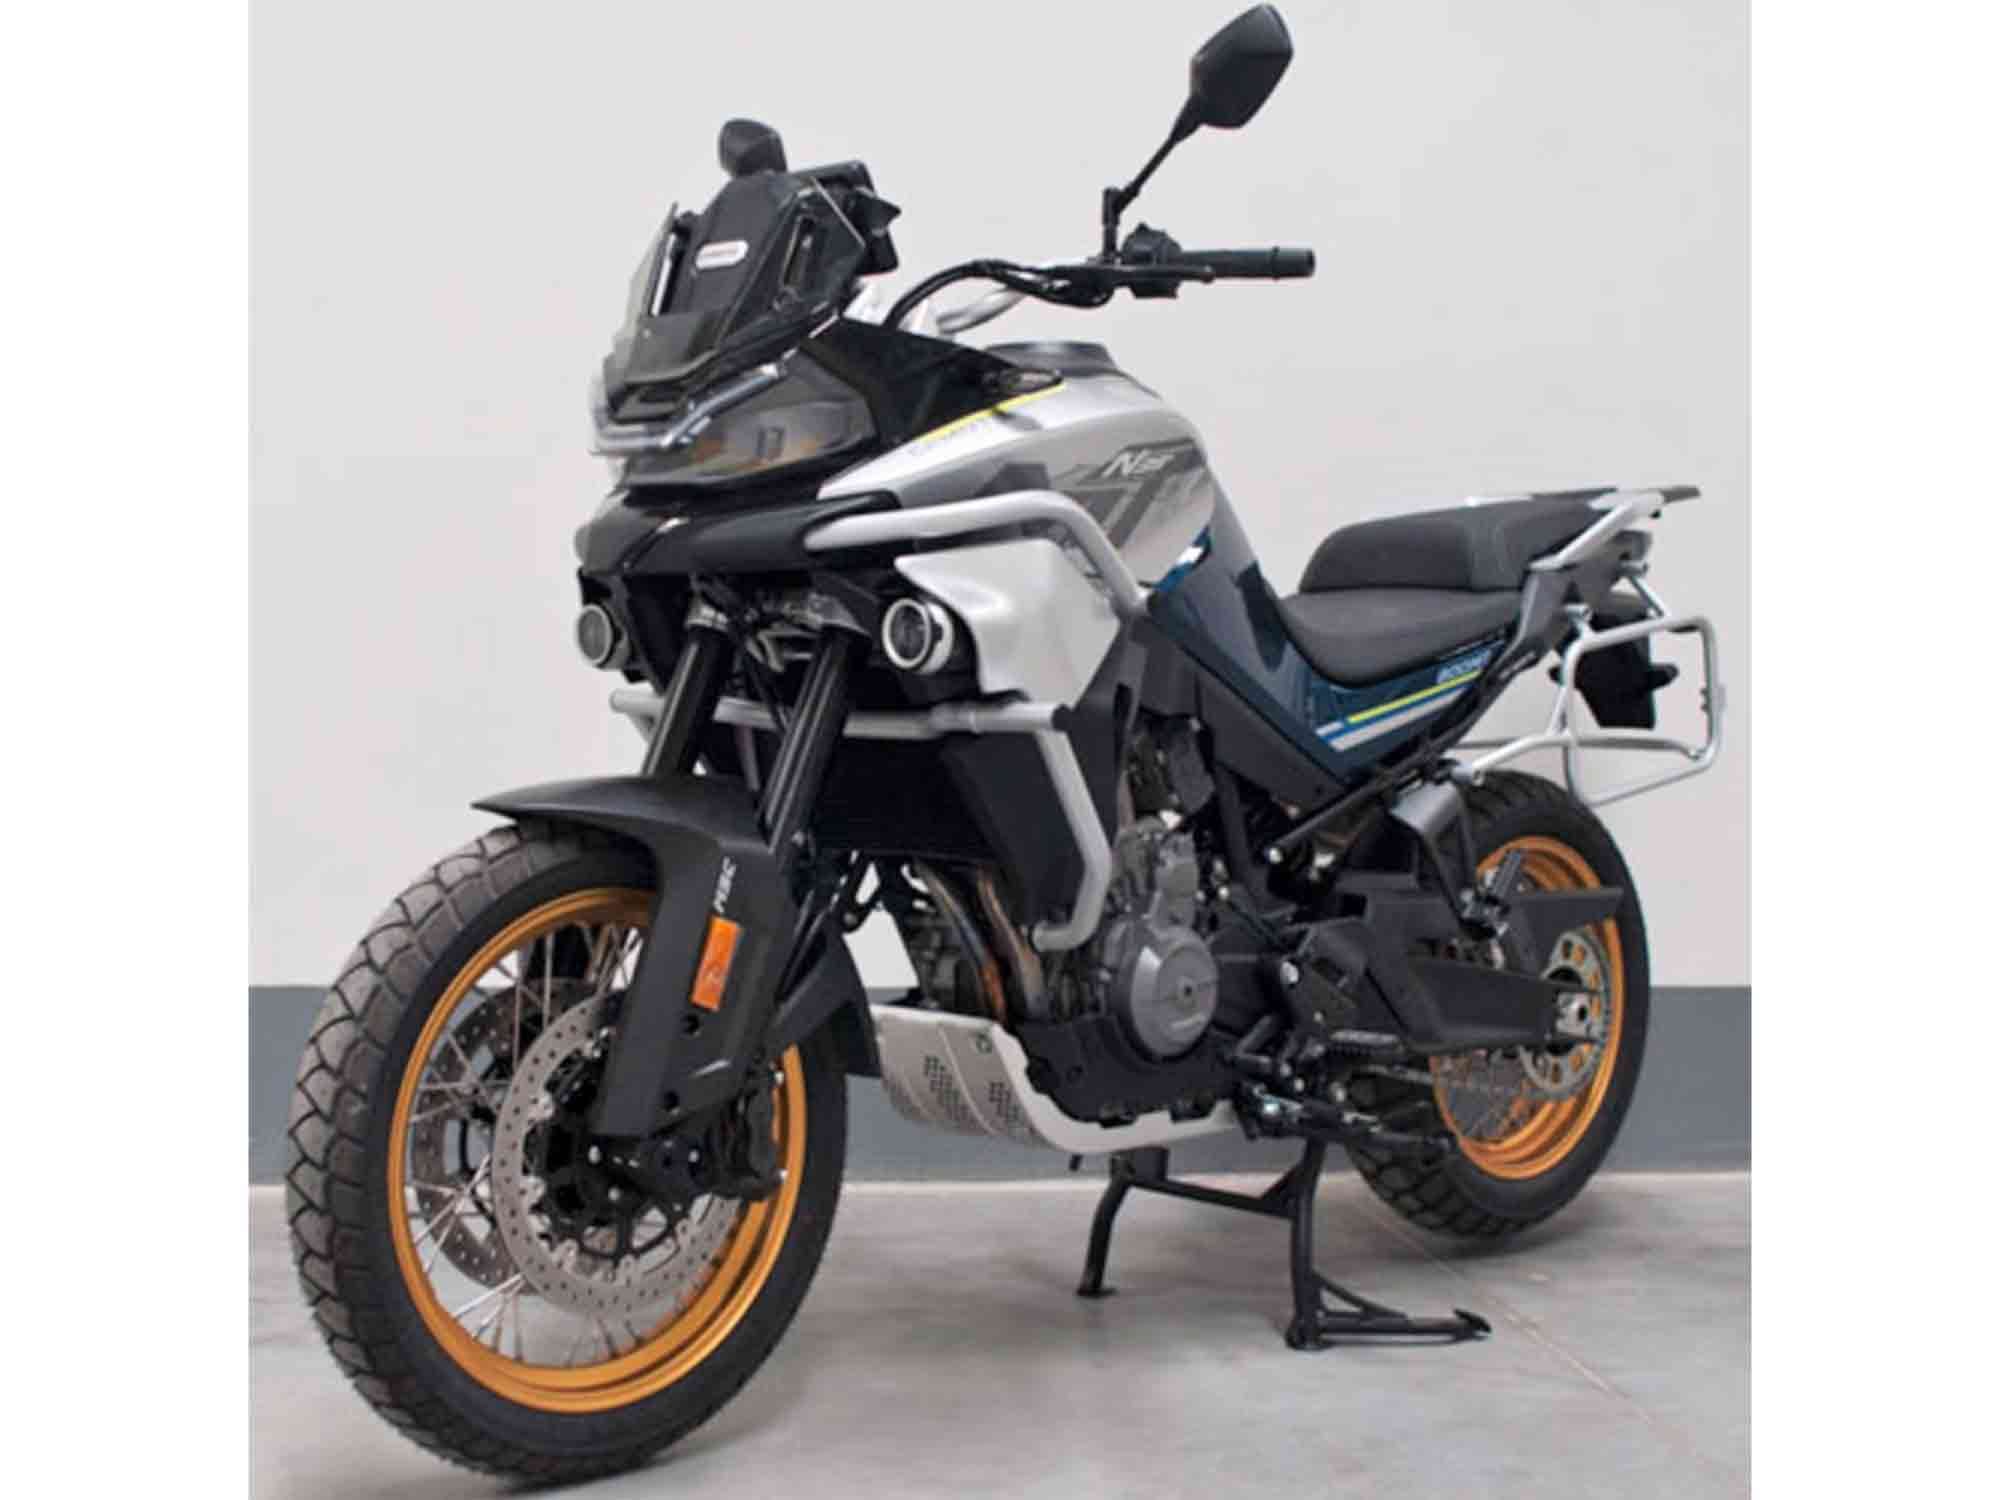 CFMoto’s new, soon-to-be-launched MT800 will come in two distinct variants, including this adventure-biased version.